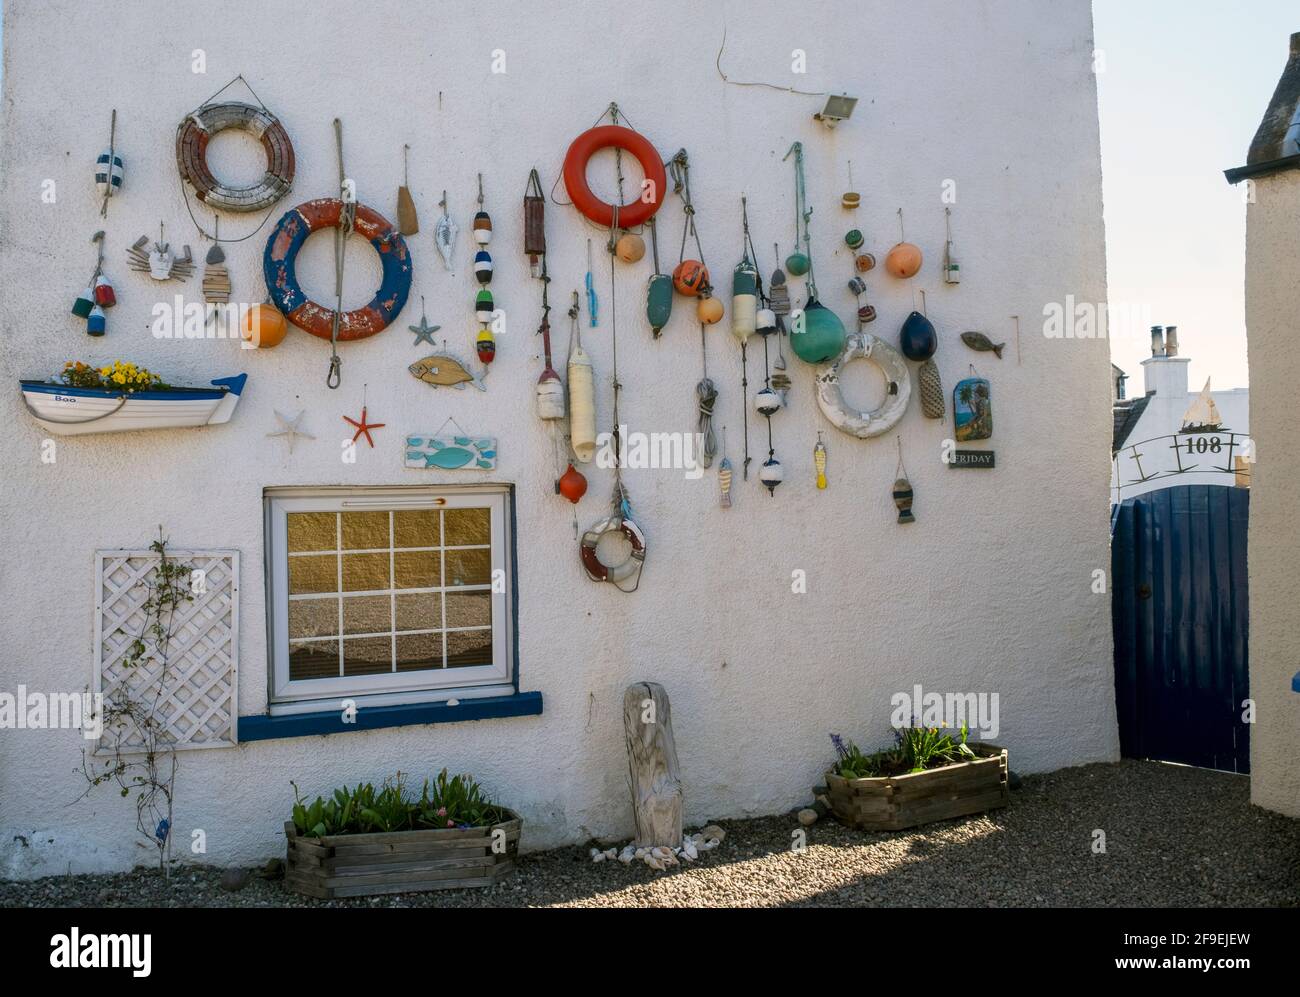 The wall of a house in Lower Largo, Fife decorated with a fishing theme. Stock Photo